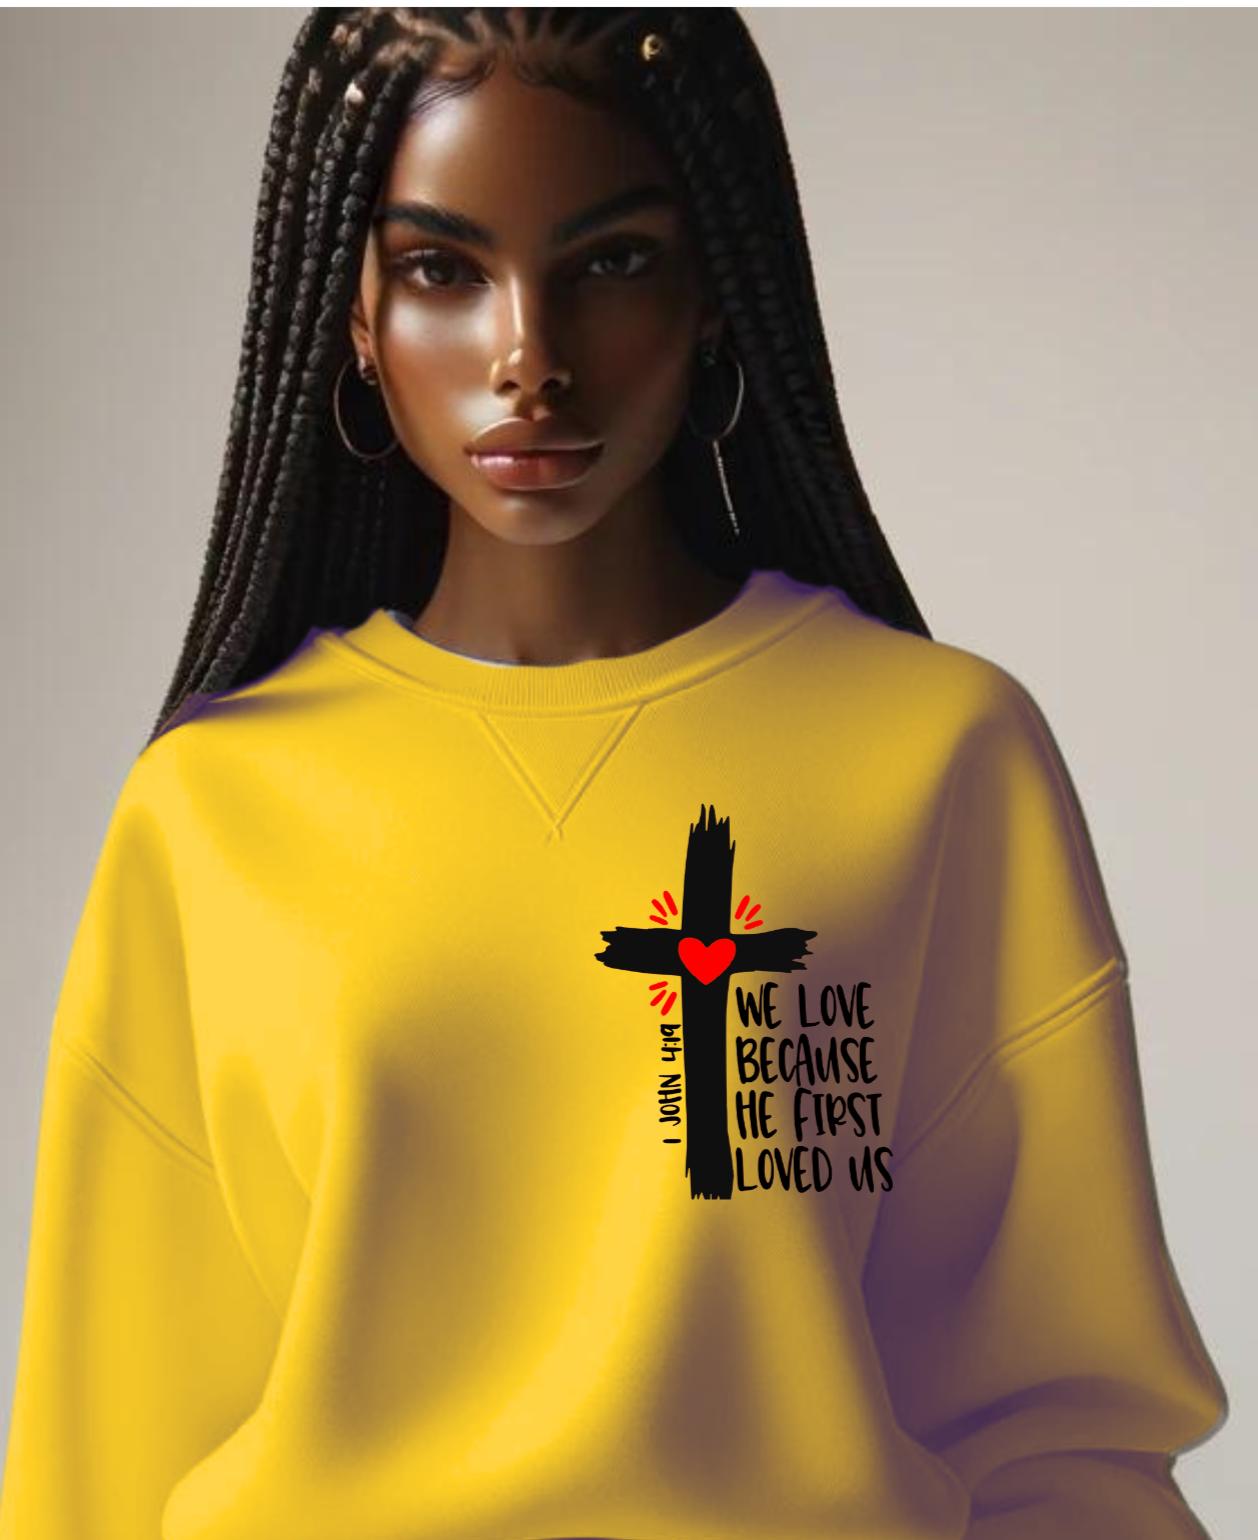 African American Woman with Yellow sweat shirt. Black Cross with the words We Love because he first Loved